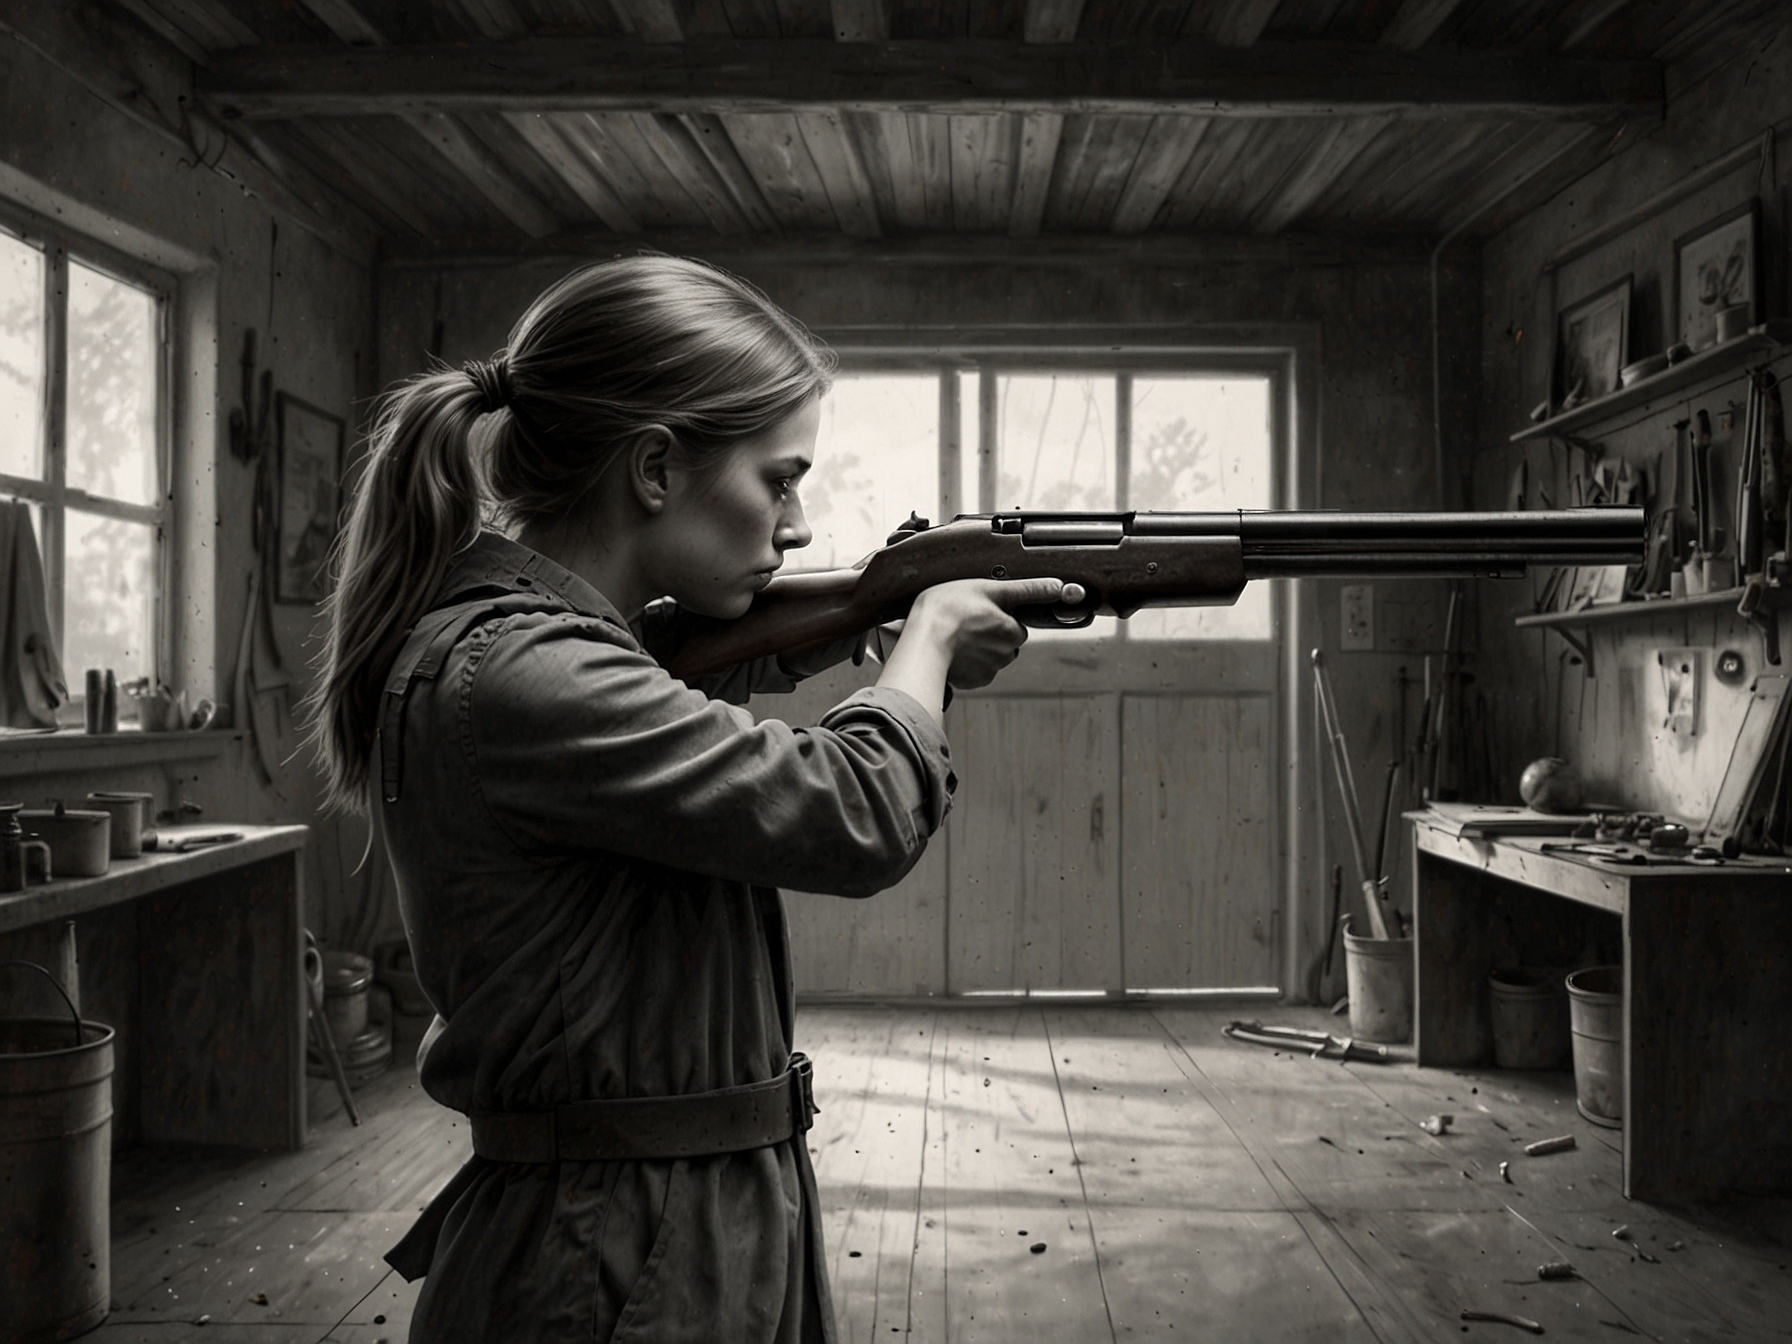 A young Mary Tucker practicing shooting in a modest garage setup, demonstrating her early dedication and resourcefulness despite limited training facilities.